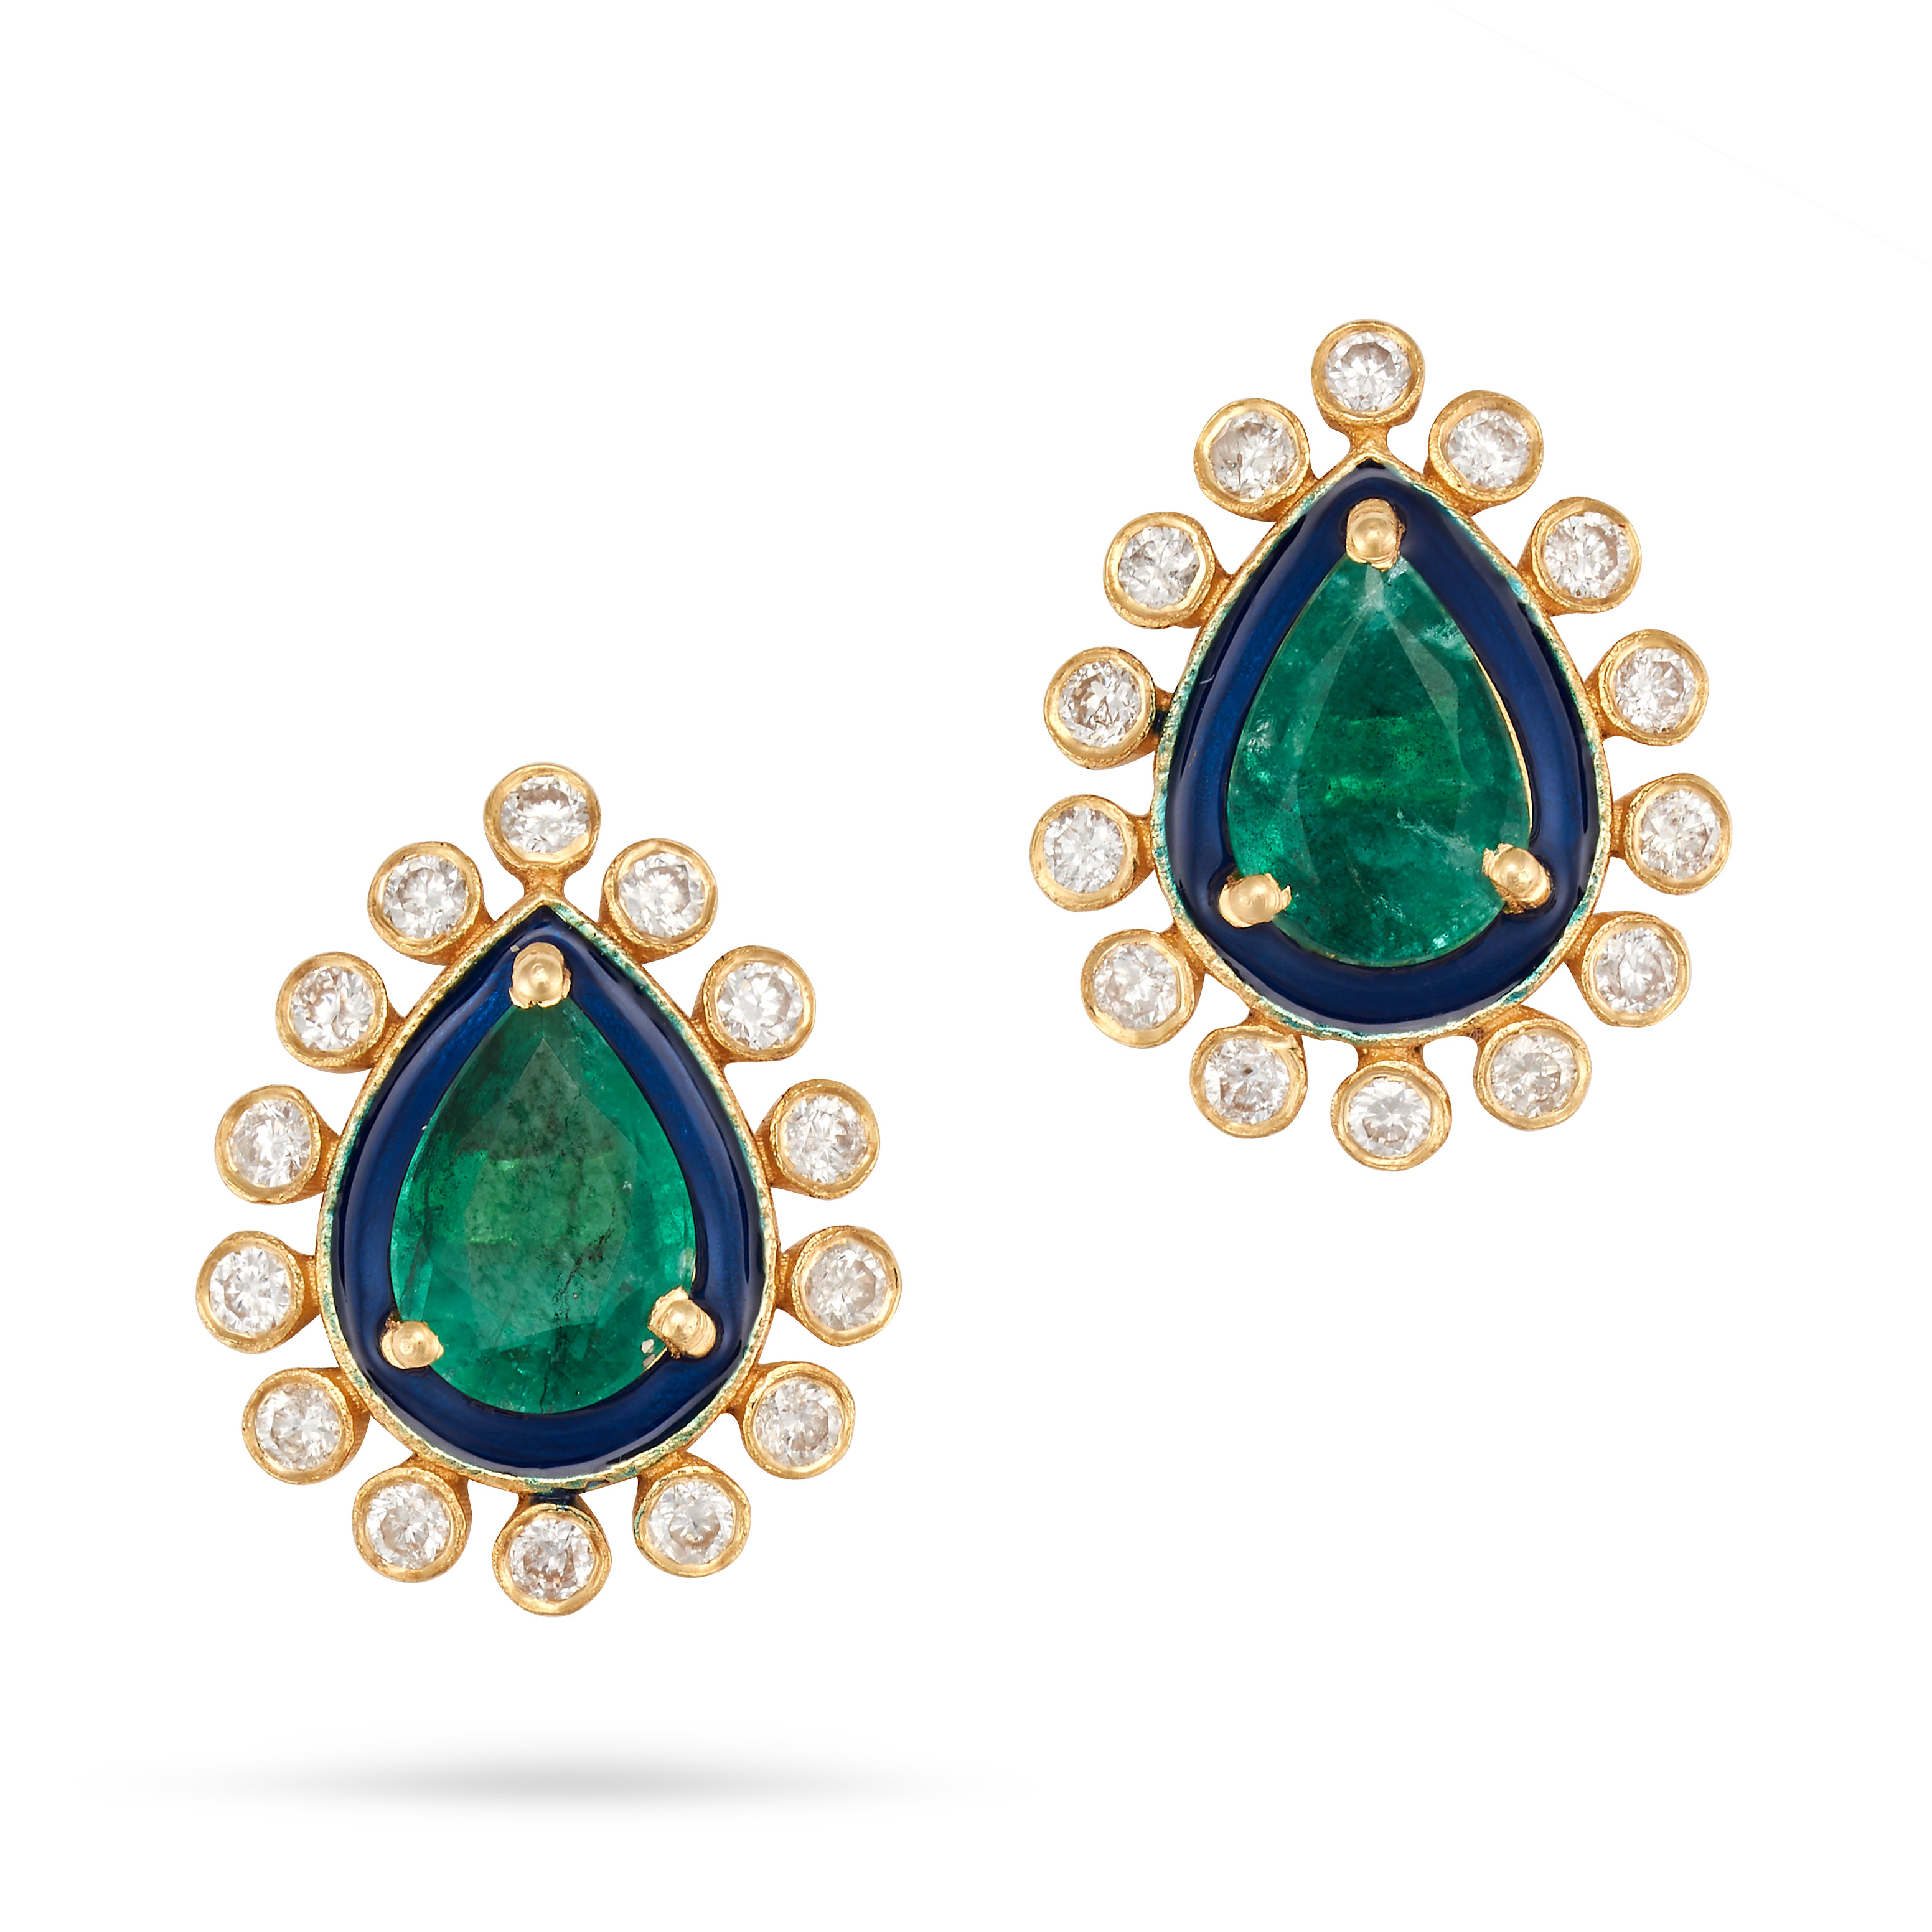 A PAIR OF EMERALD, ENAMEL AND DIAMOND EARRINGS each set with a pear cut emerald in a border of bl...